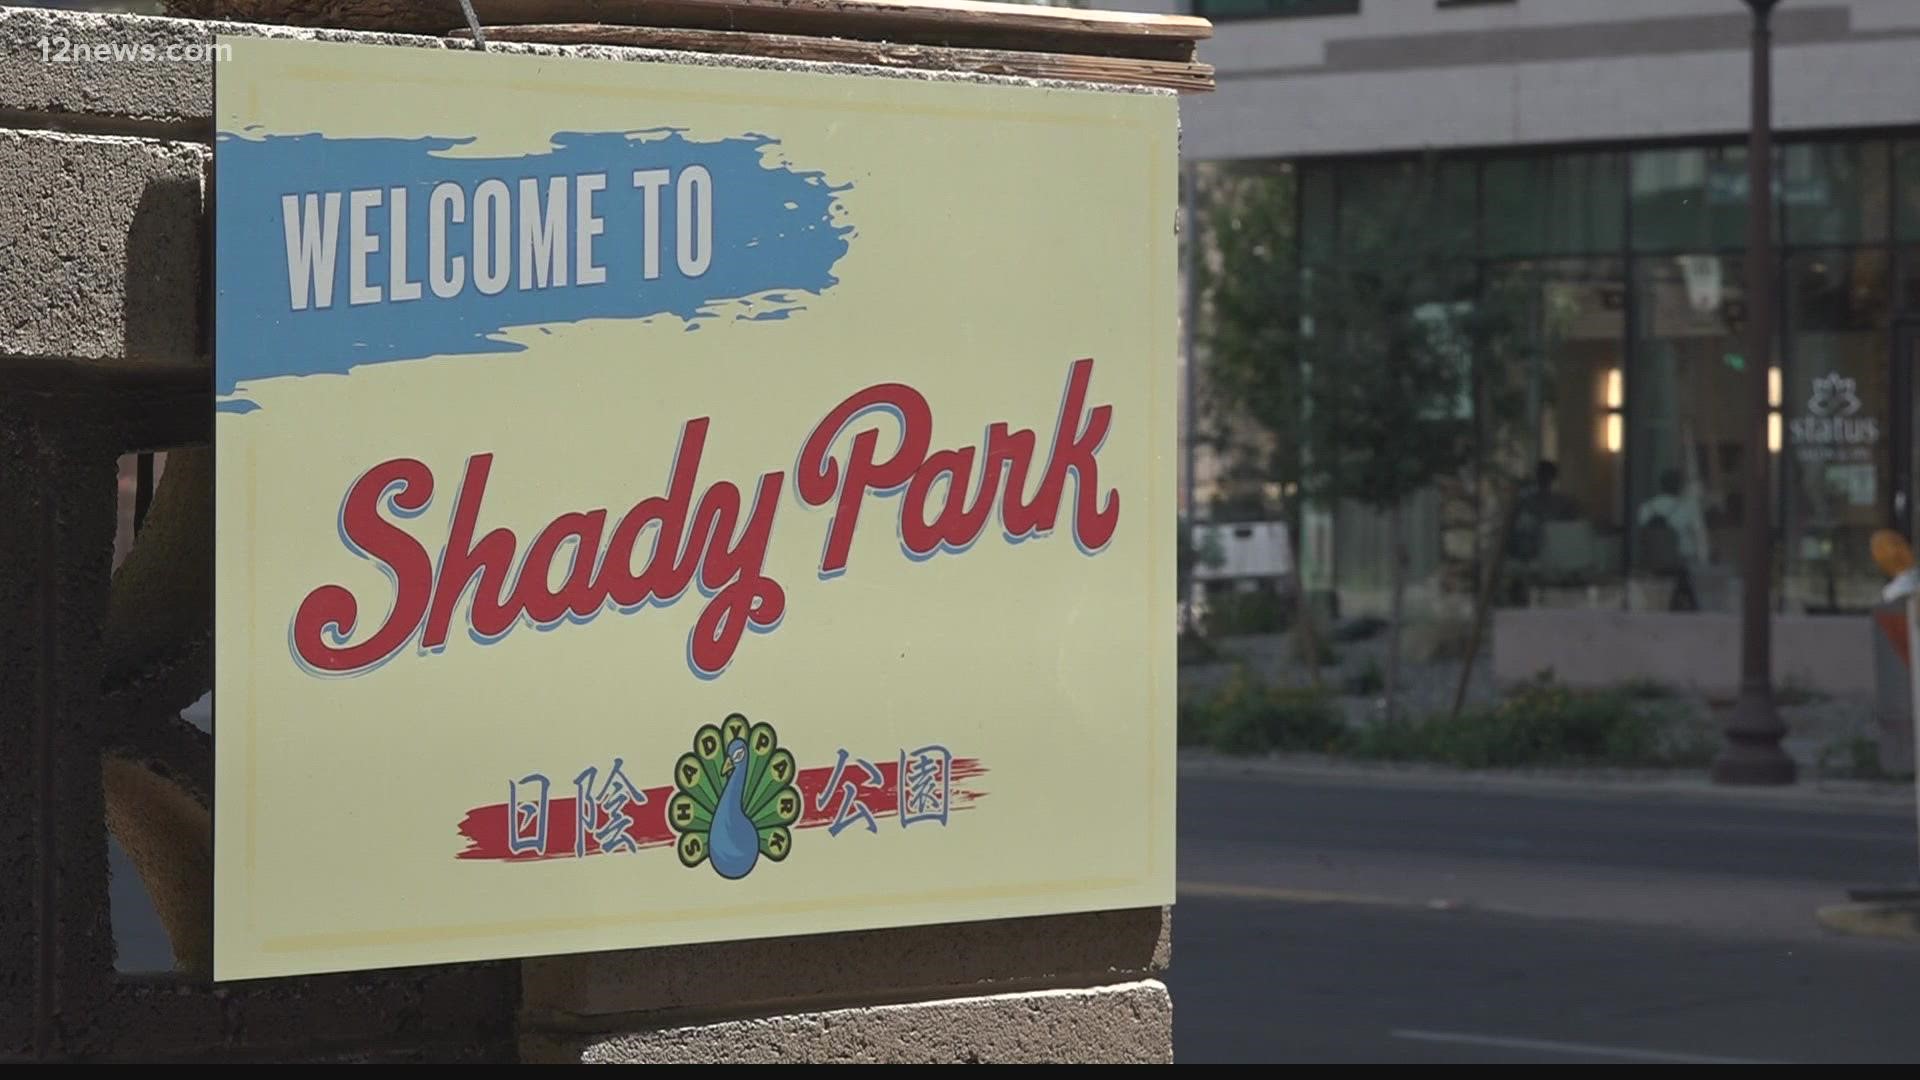 A concert venue in downtown Tempe, Shady Park, says a recent court ruling could mean the end of their business. The venue says it plans to fight the ruling.